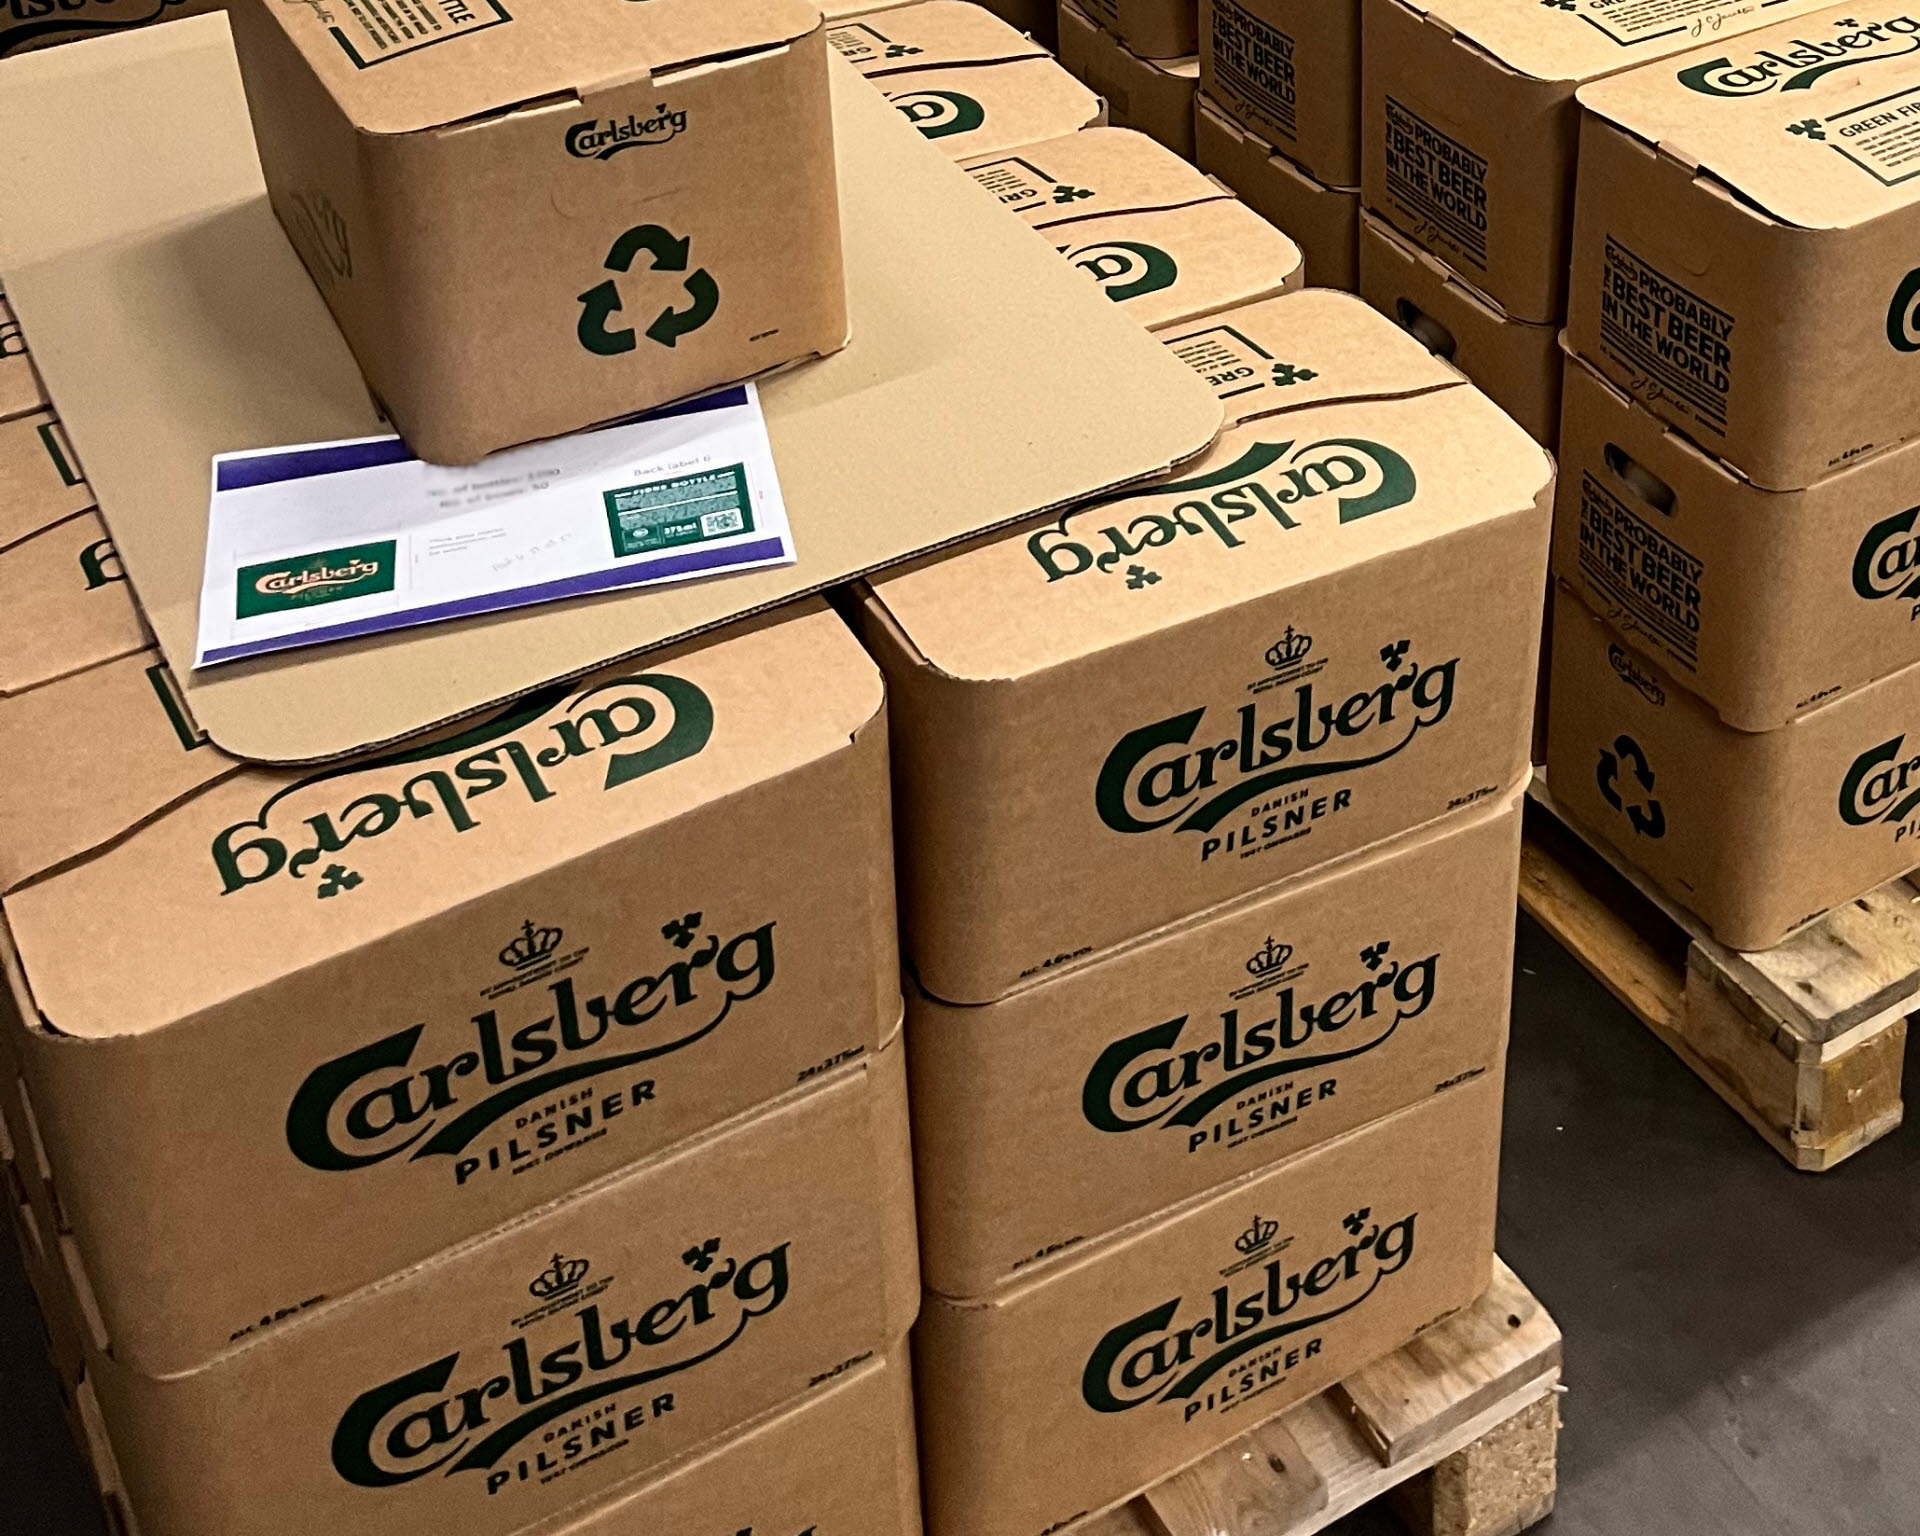 Carlsberg’s New Fibre Bottle is shipped in curved SCA Arcwise packaging